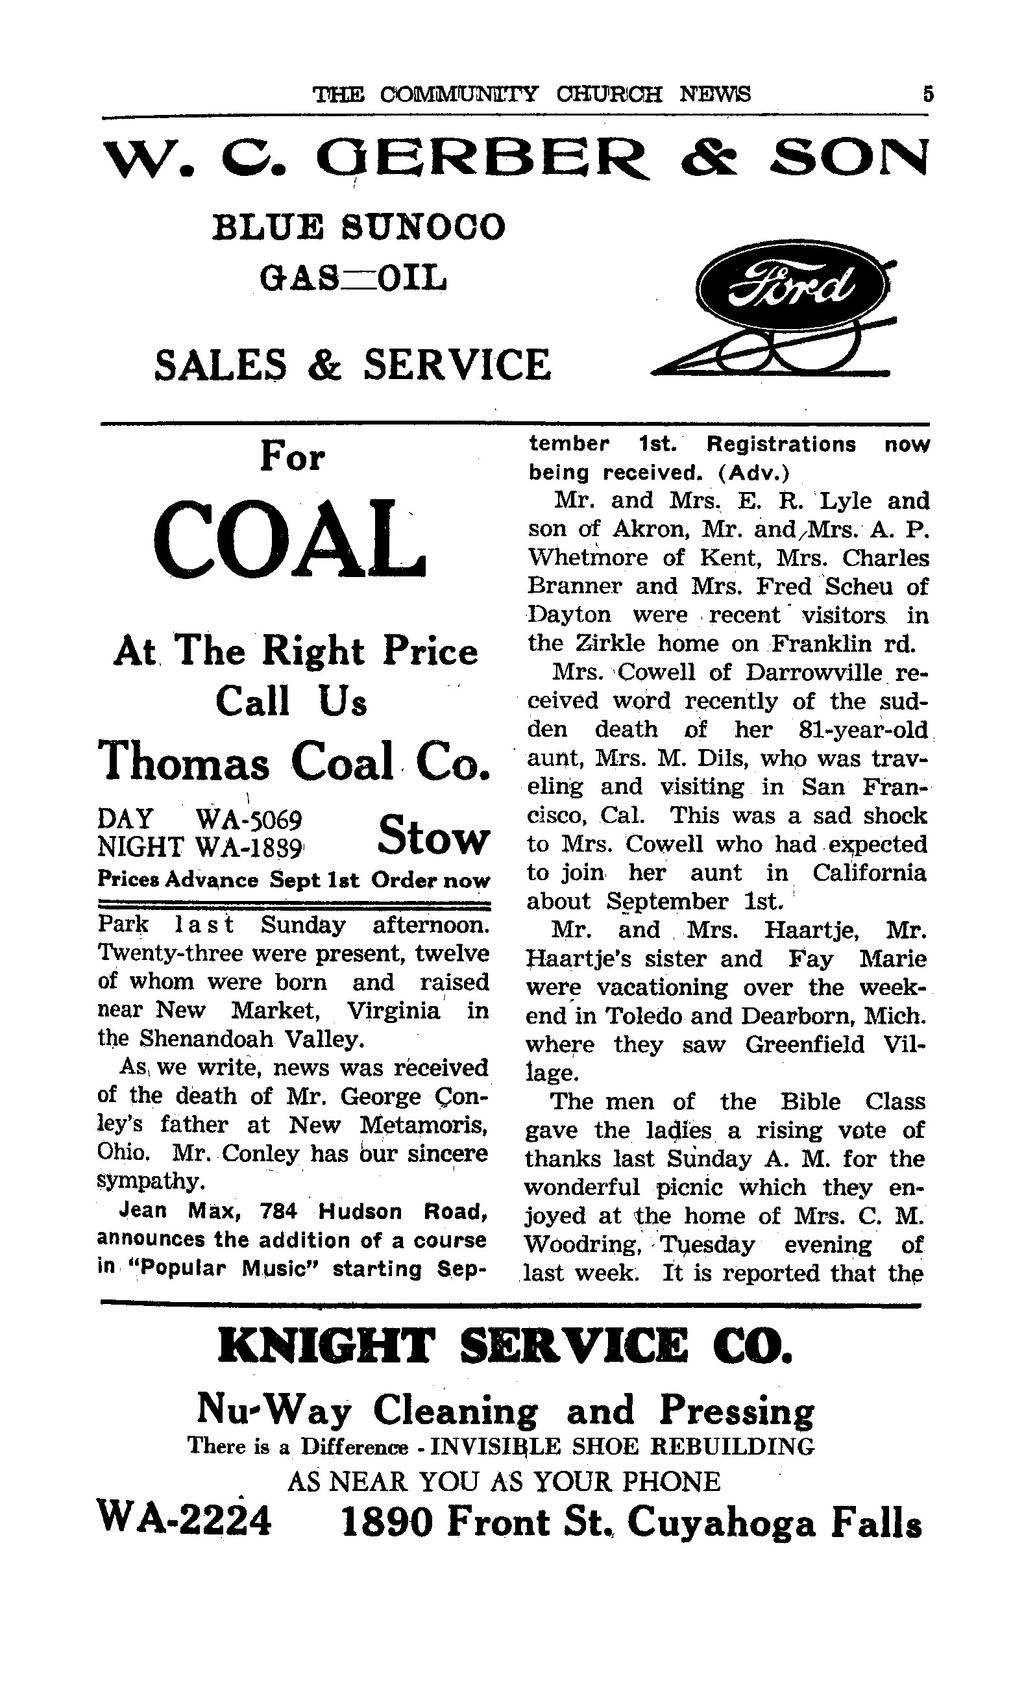 THE COMMUNITY OKUR'OH NBW1S 5 W. C. OERBER & SON BLUE SUNOCO GASzzOIL SALES & SERVICE For COAL At The Right Price Call Us Thomas Coal Co. DAY WA-5069 Q.